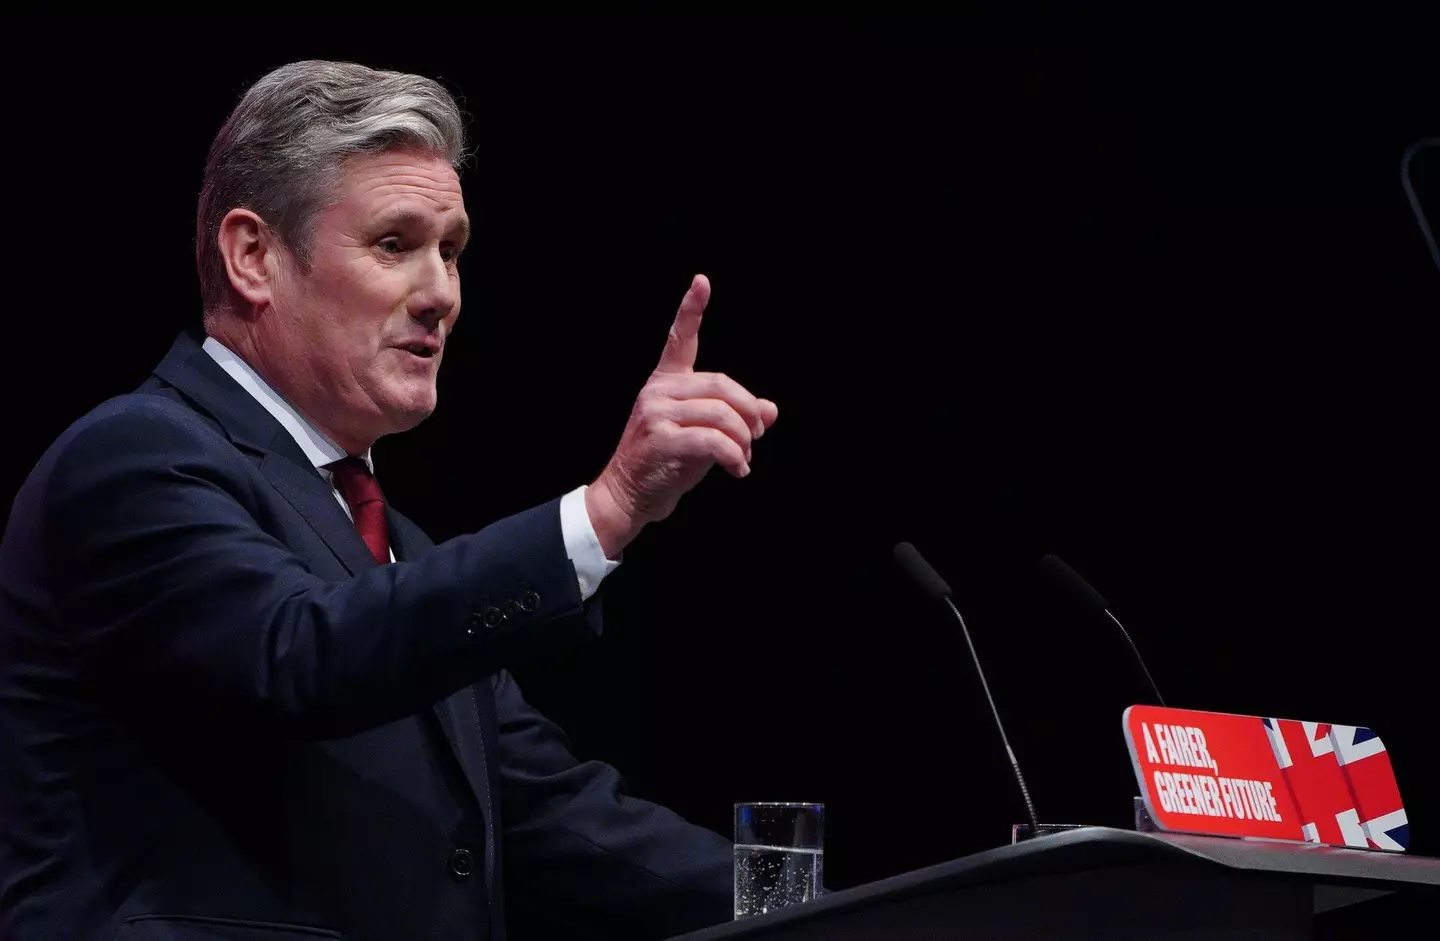 Keir Starmer accused the Conservative party of having 'lost control of the British economy'.